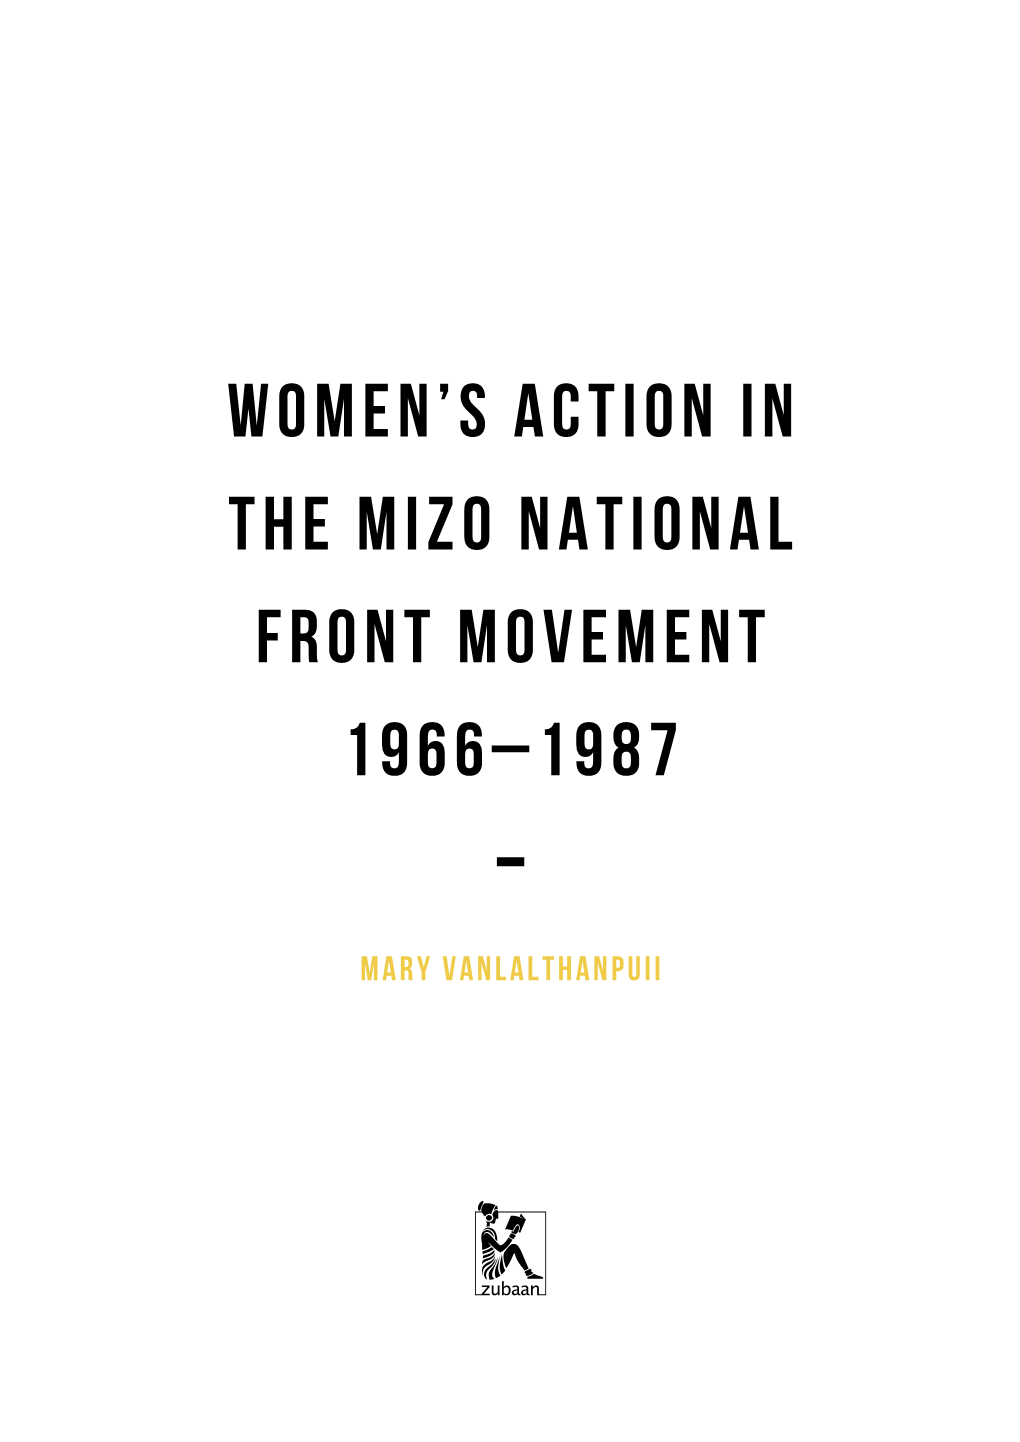 Women's Action in the Mizo National Front Movement